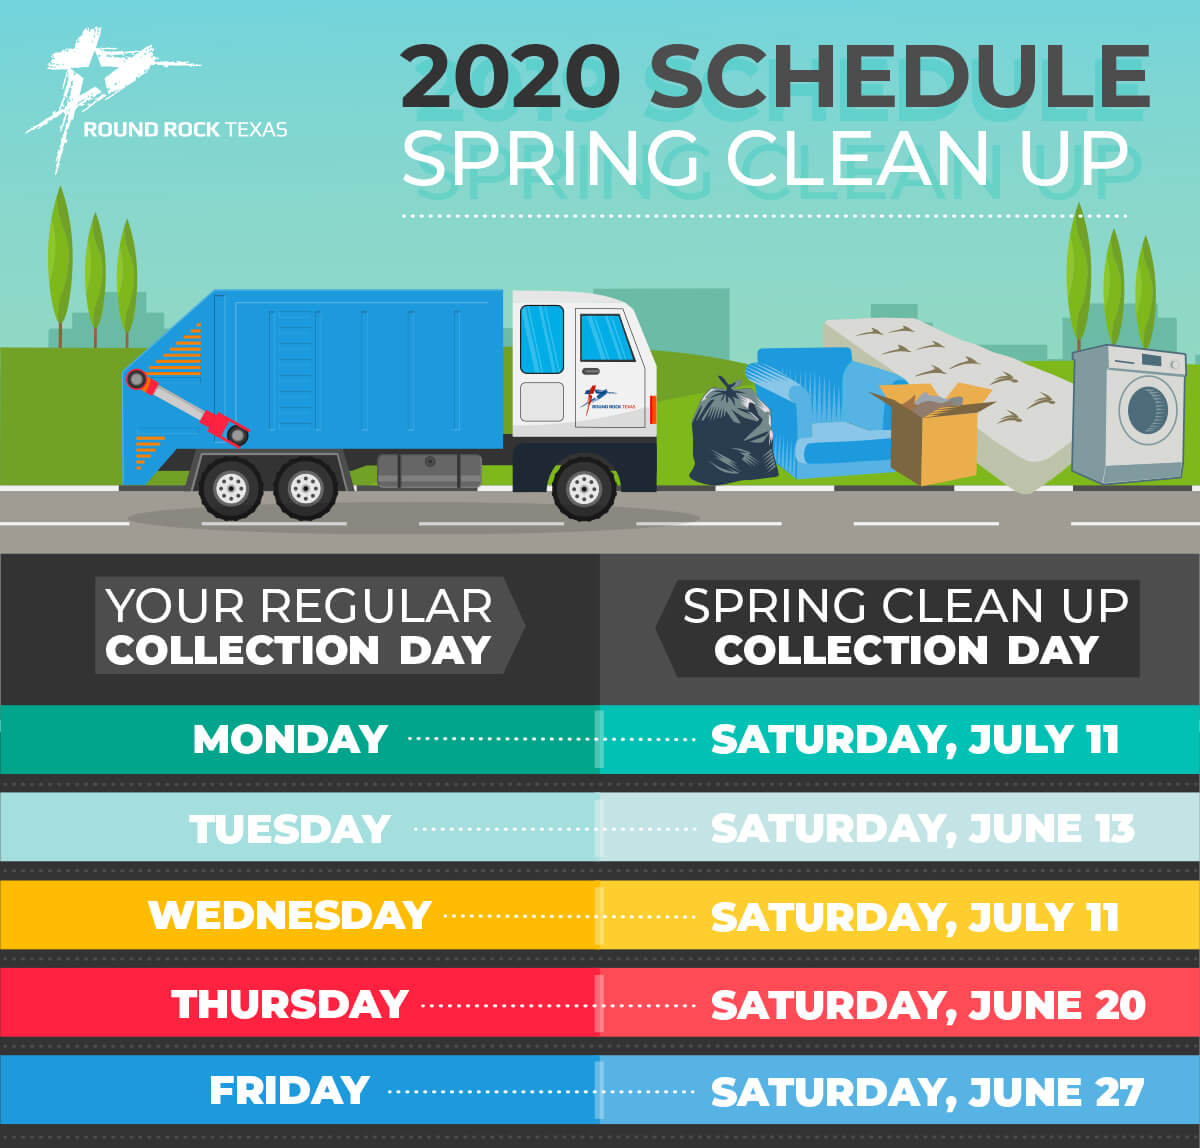 Spring Clean Up City Of Round Rock